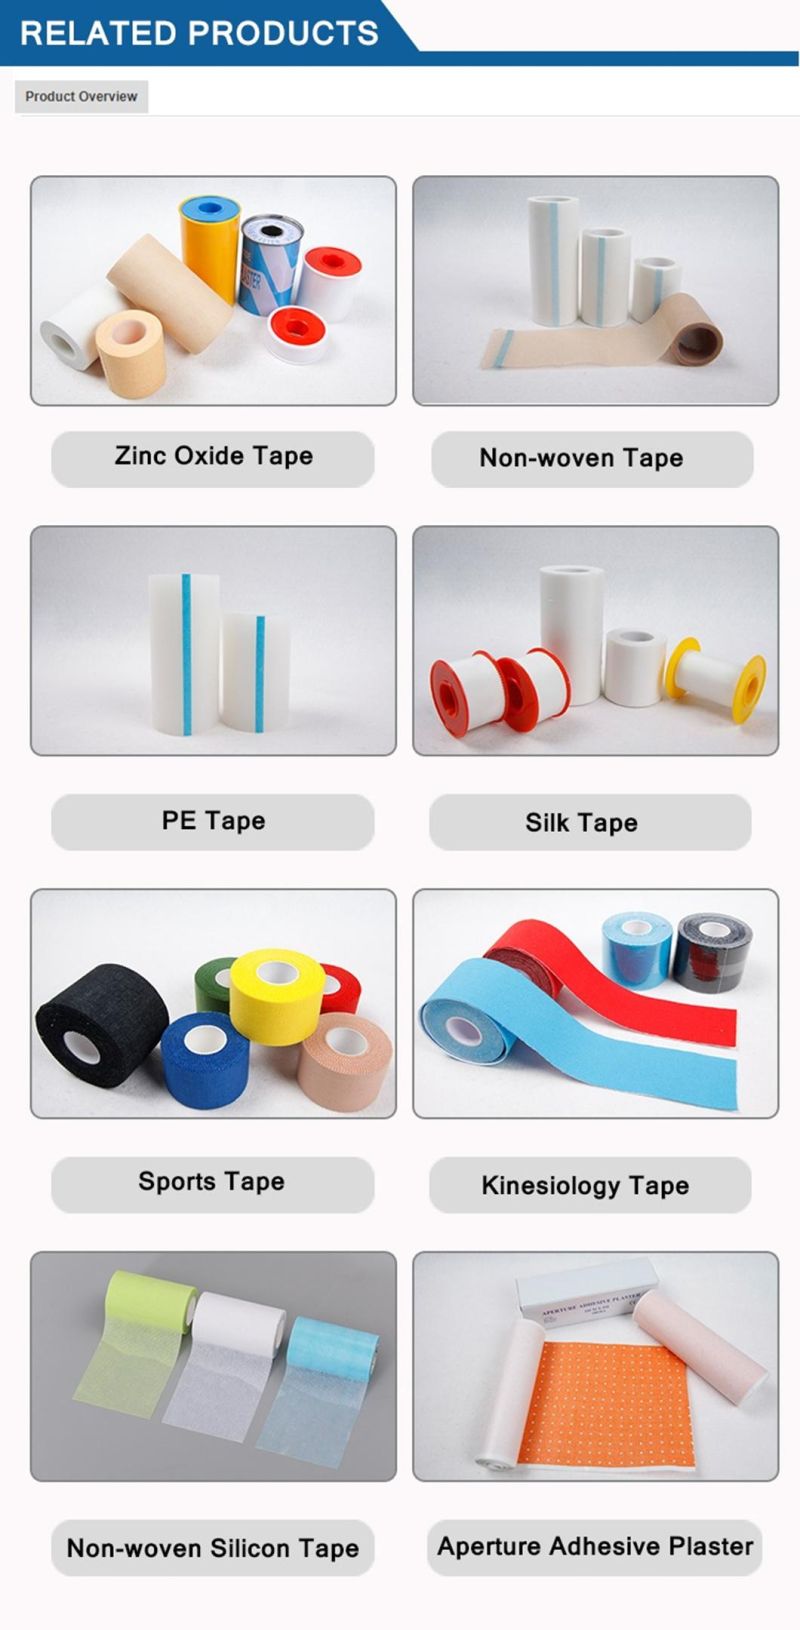 Best Selling Air Permeable Non-Woven Medical Tape